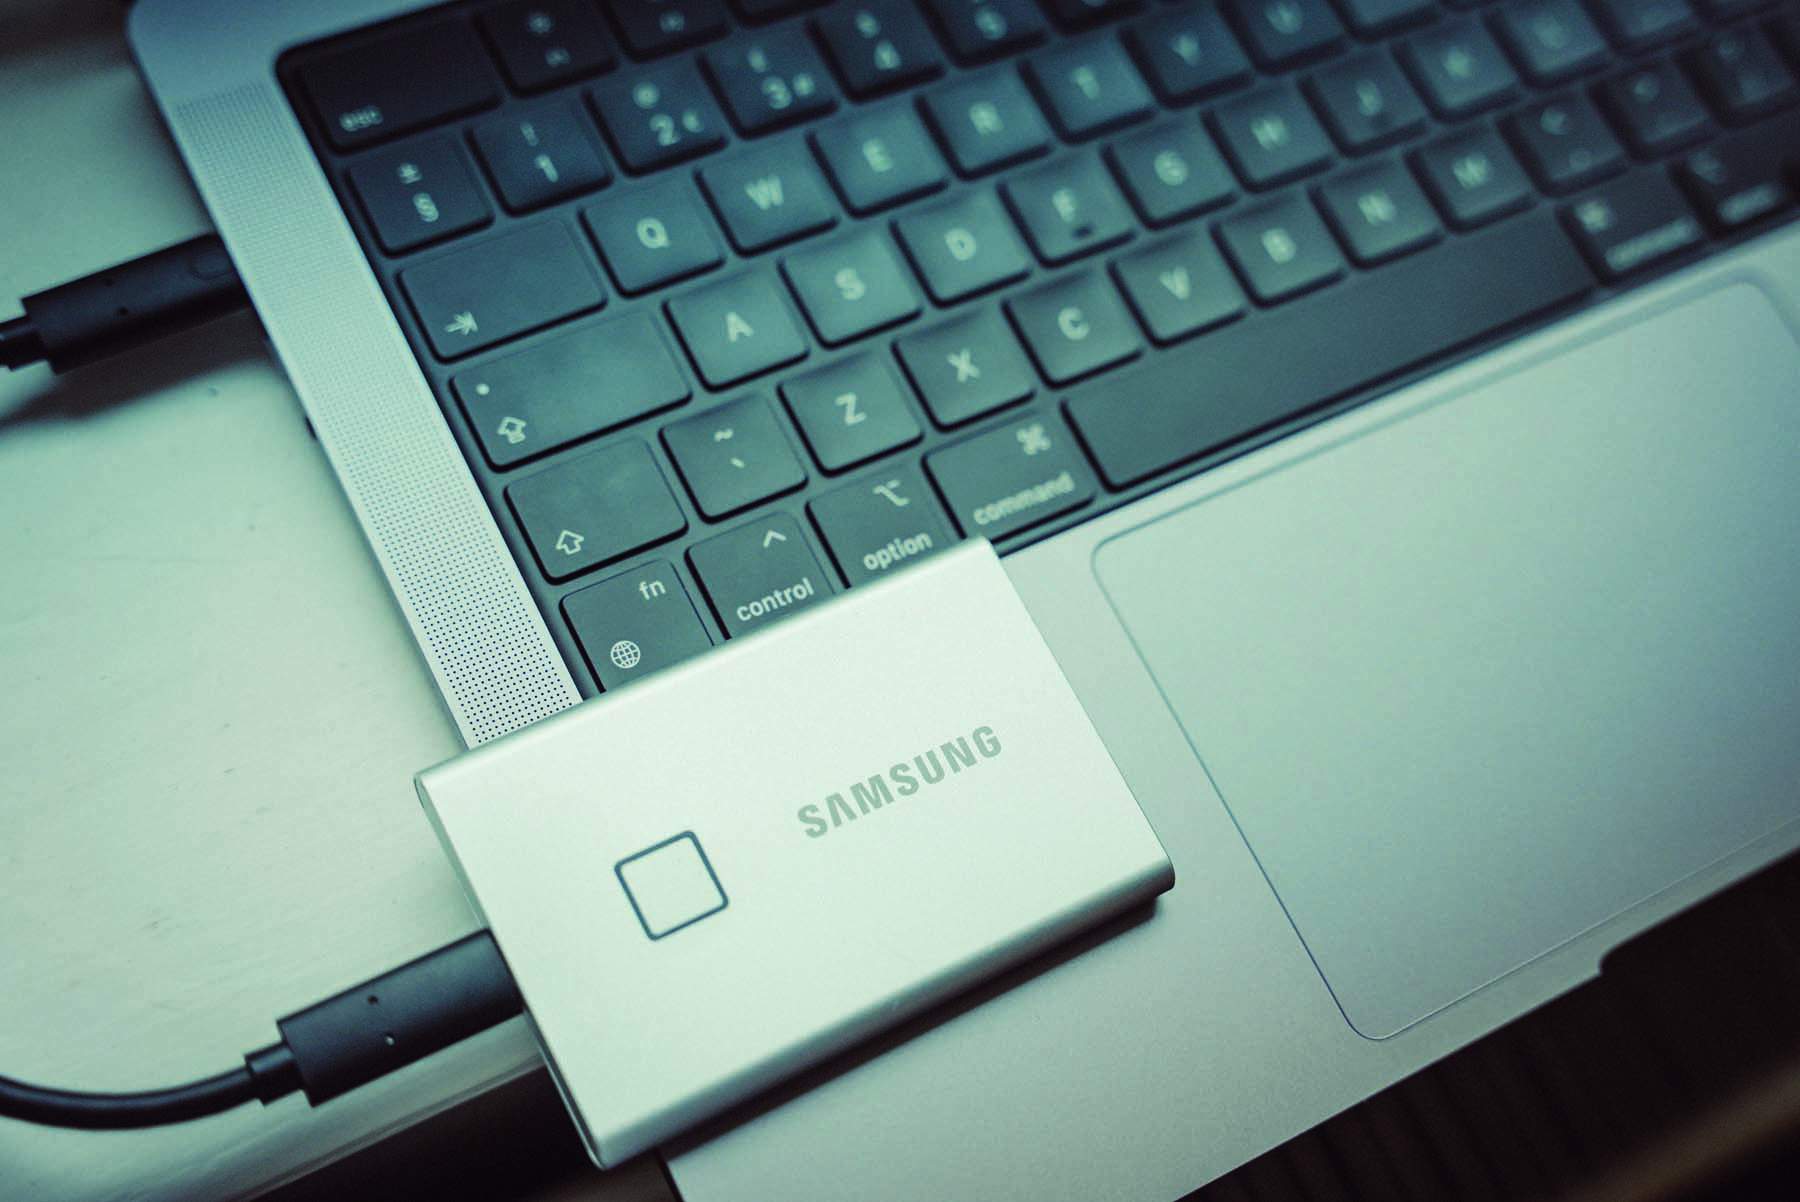 Samsung Portable SSD T7 Touch on laptop keyboard